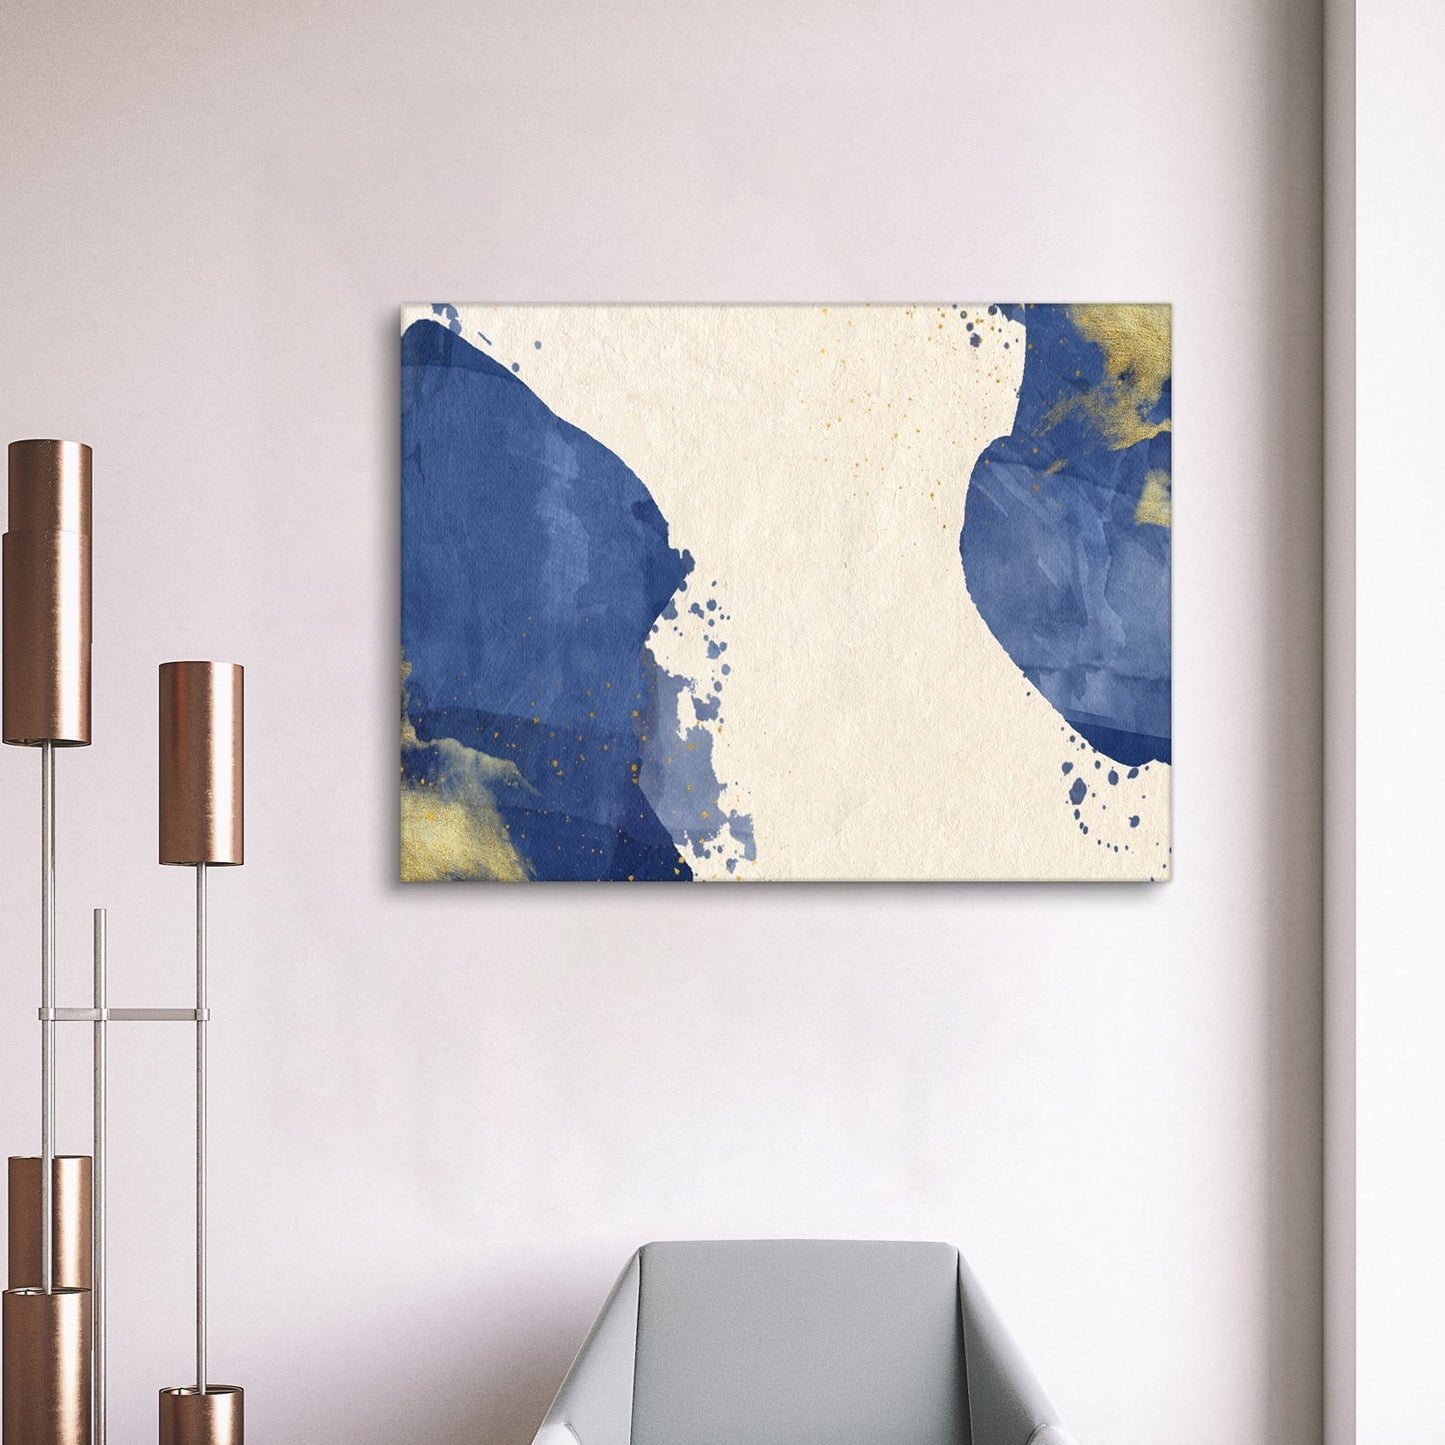 Framed Canvas Wall Art Decor Abstract Painting, Blue and White Color Decoration For Office Living Room, Bedroom Decor-Ready To Hang